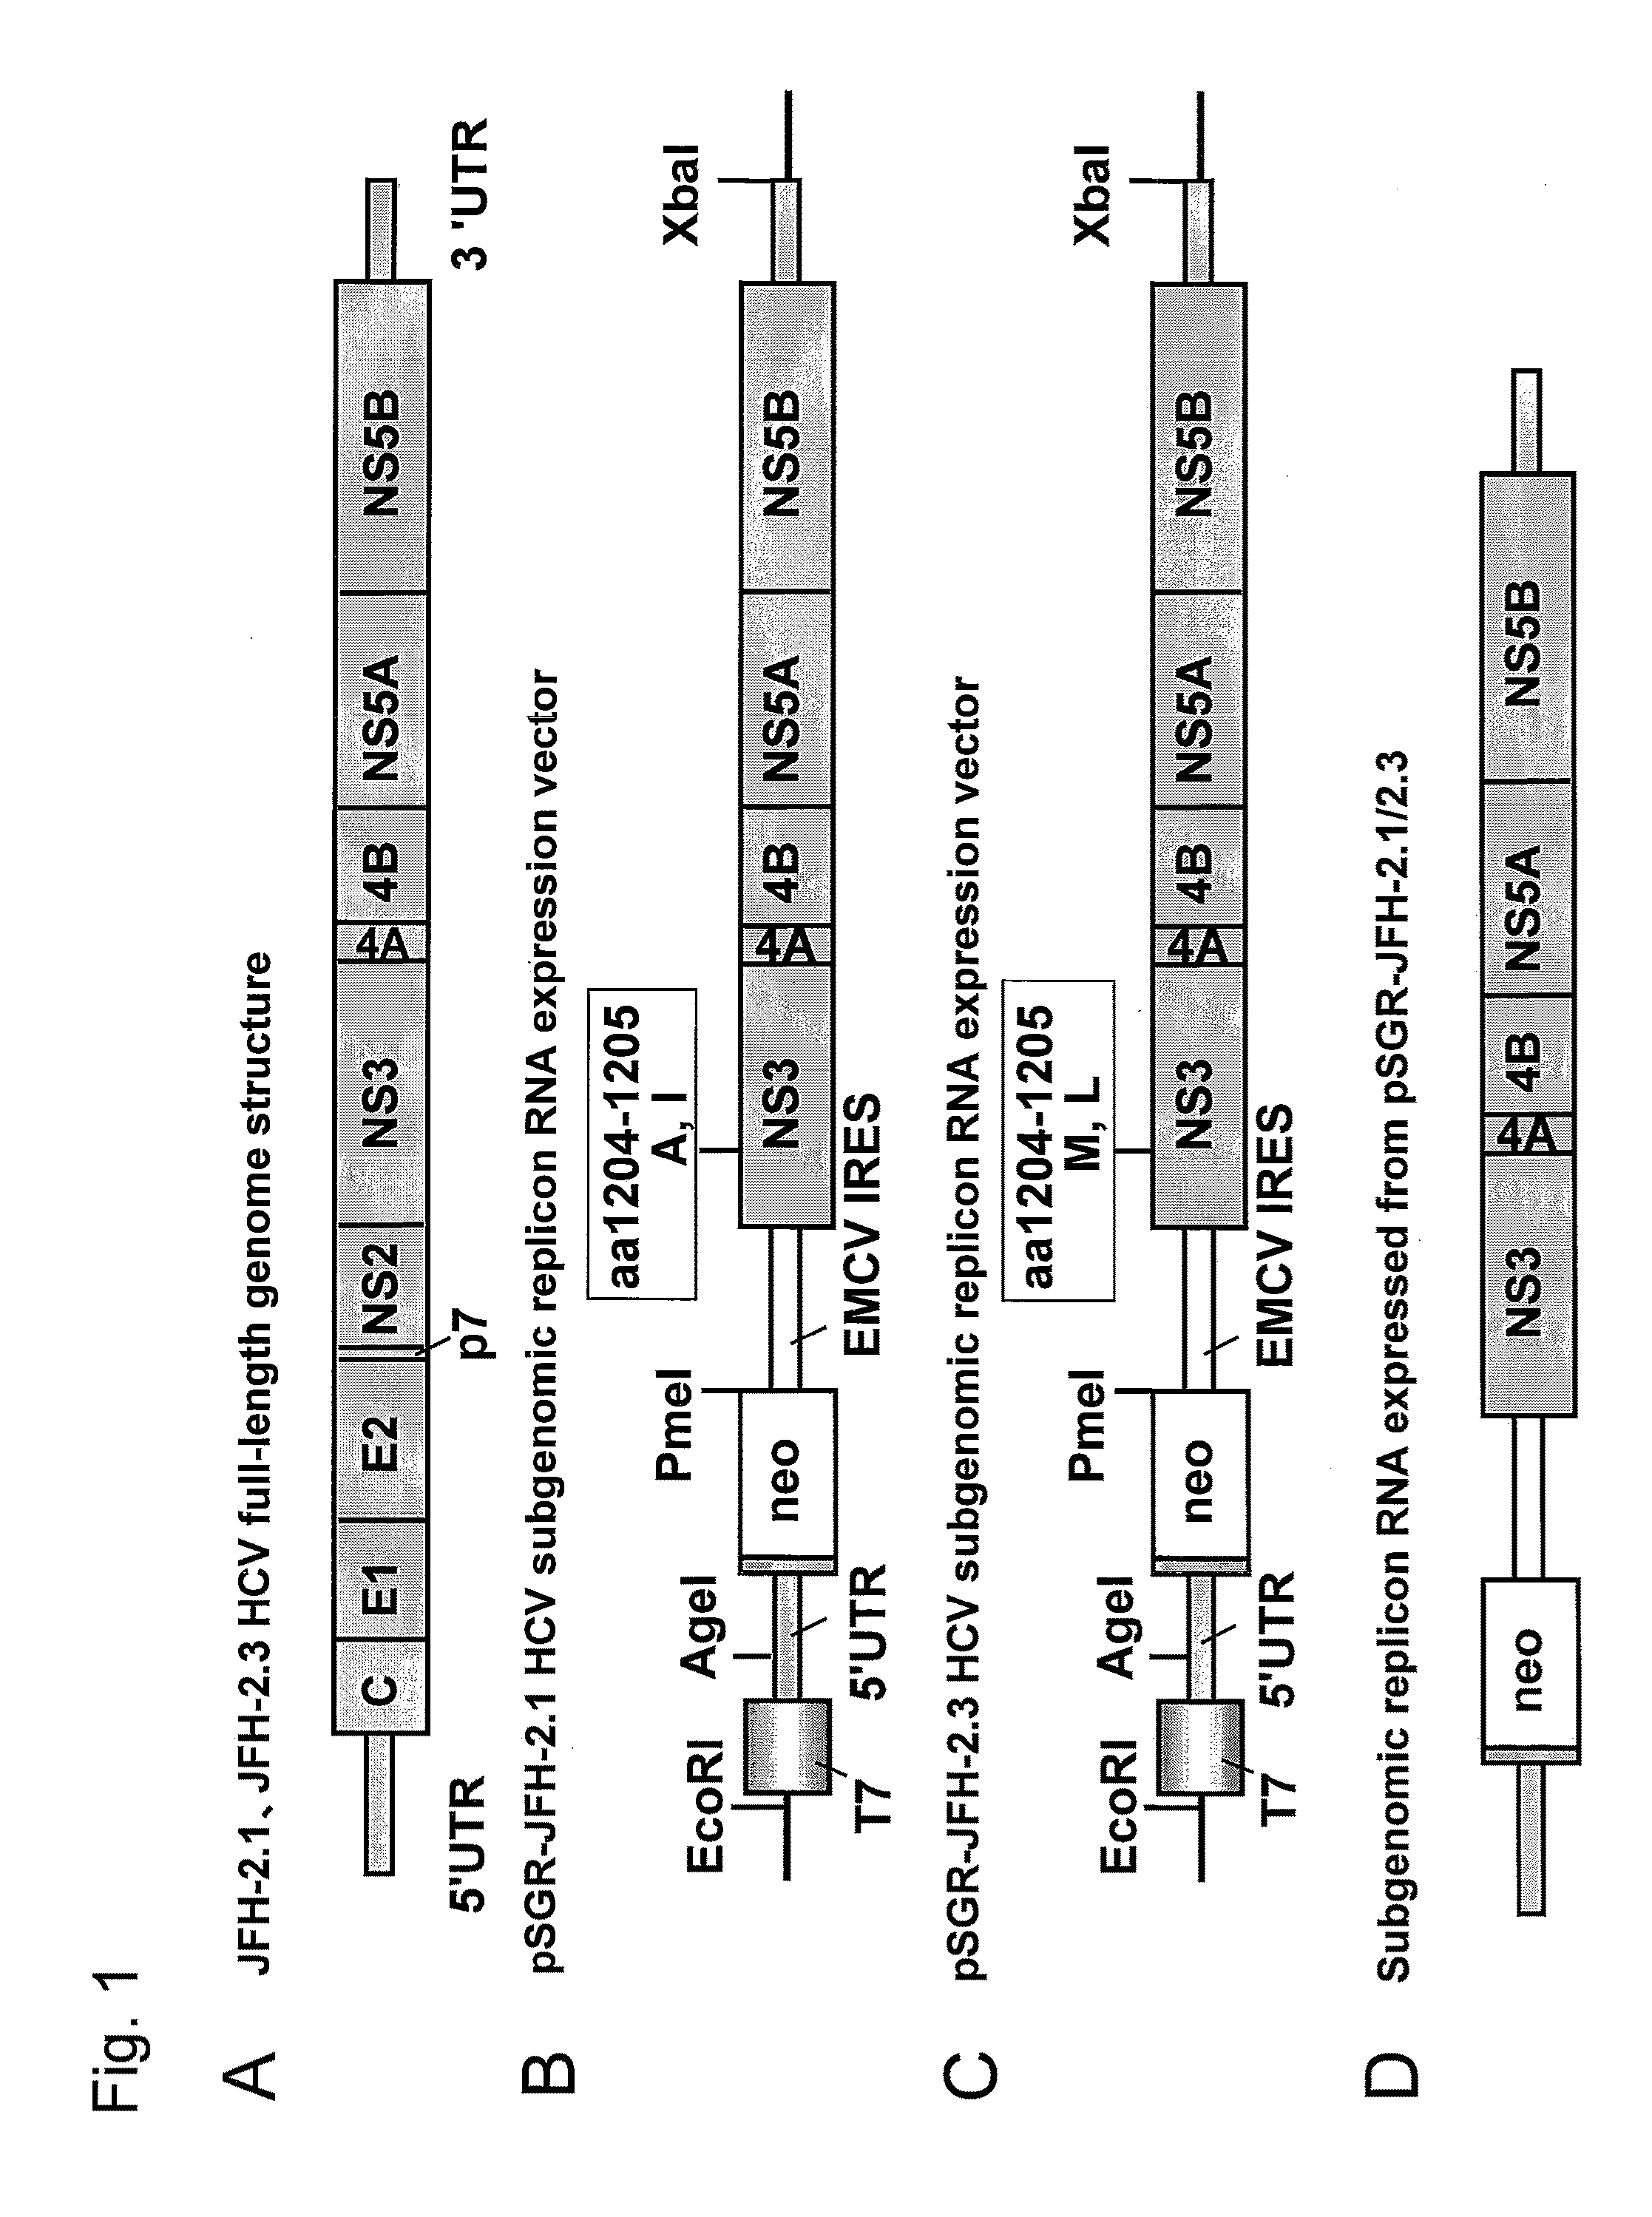 Nucleic acid derived from hepatitis c virus and expression vector, transformed cell, and hepatitis c virus particles each prepared by using the same